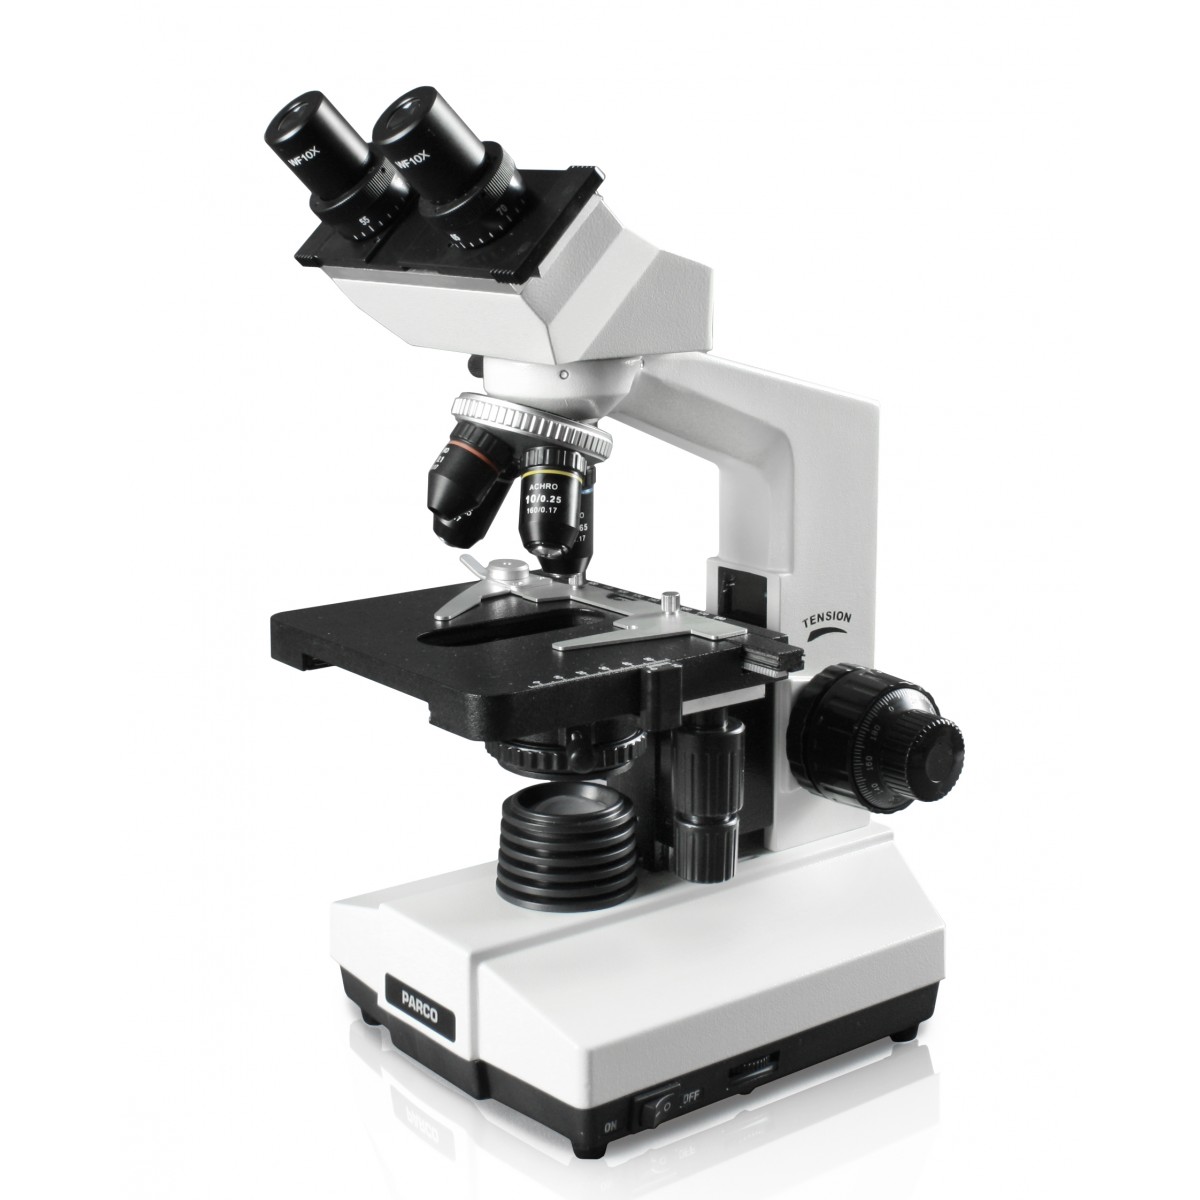 1.25 NA Abbe Condenser 10x WF Eyepiece Parco Scientific RCM-602-L Monocular Compound Microscope 40x—1000x Magnification LED Koehler Illumination Mechanical Stage Coaxial Coarse & Fine Focus 